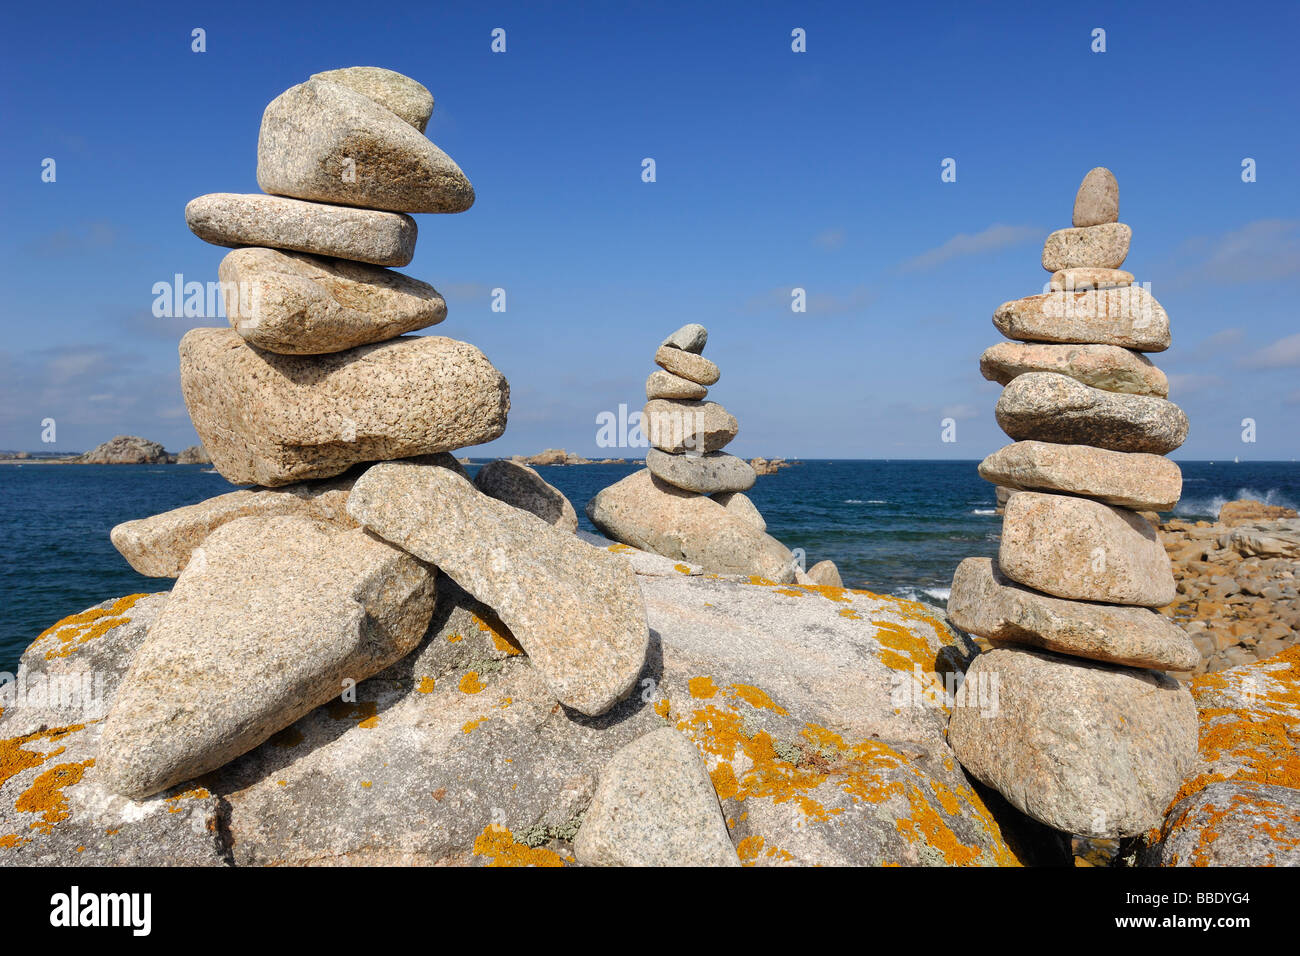 Stone Towers on Coast, Plougrescant, Cote de Granit Rose, Brittany, France Stock Photo